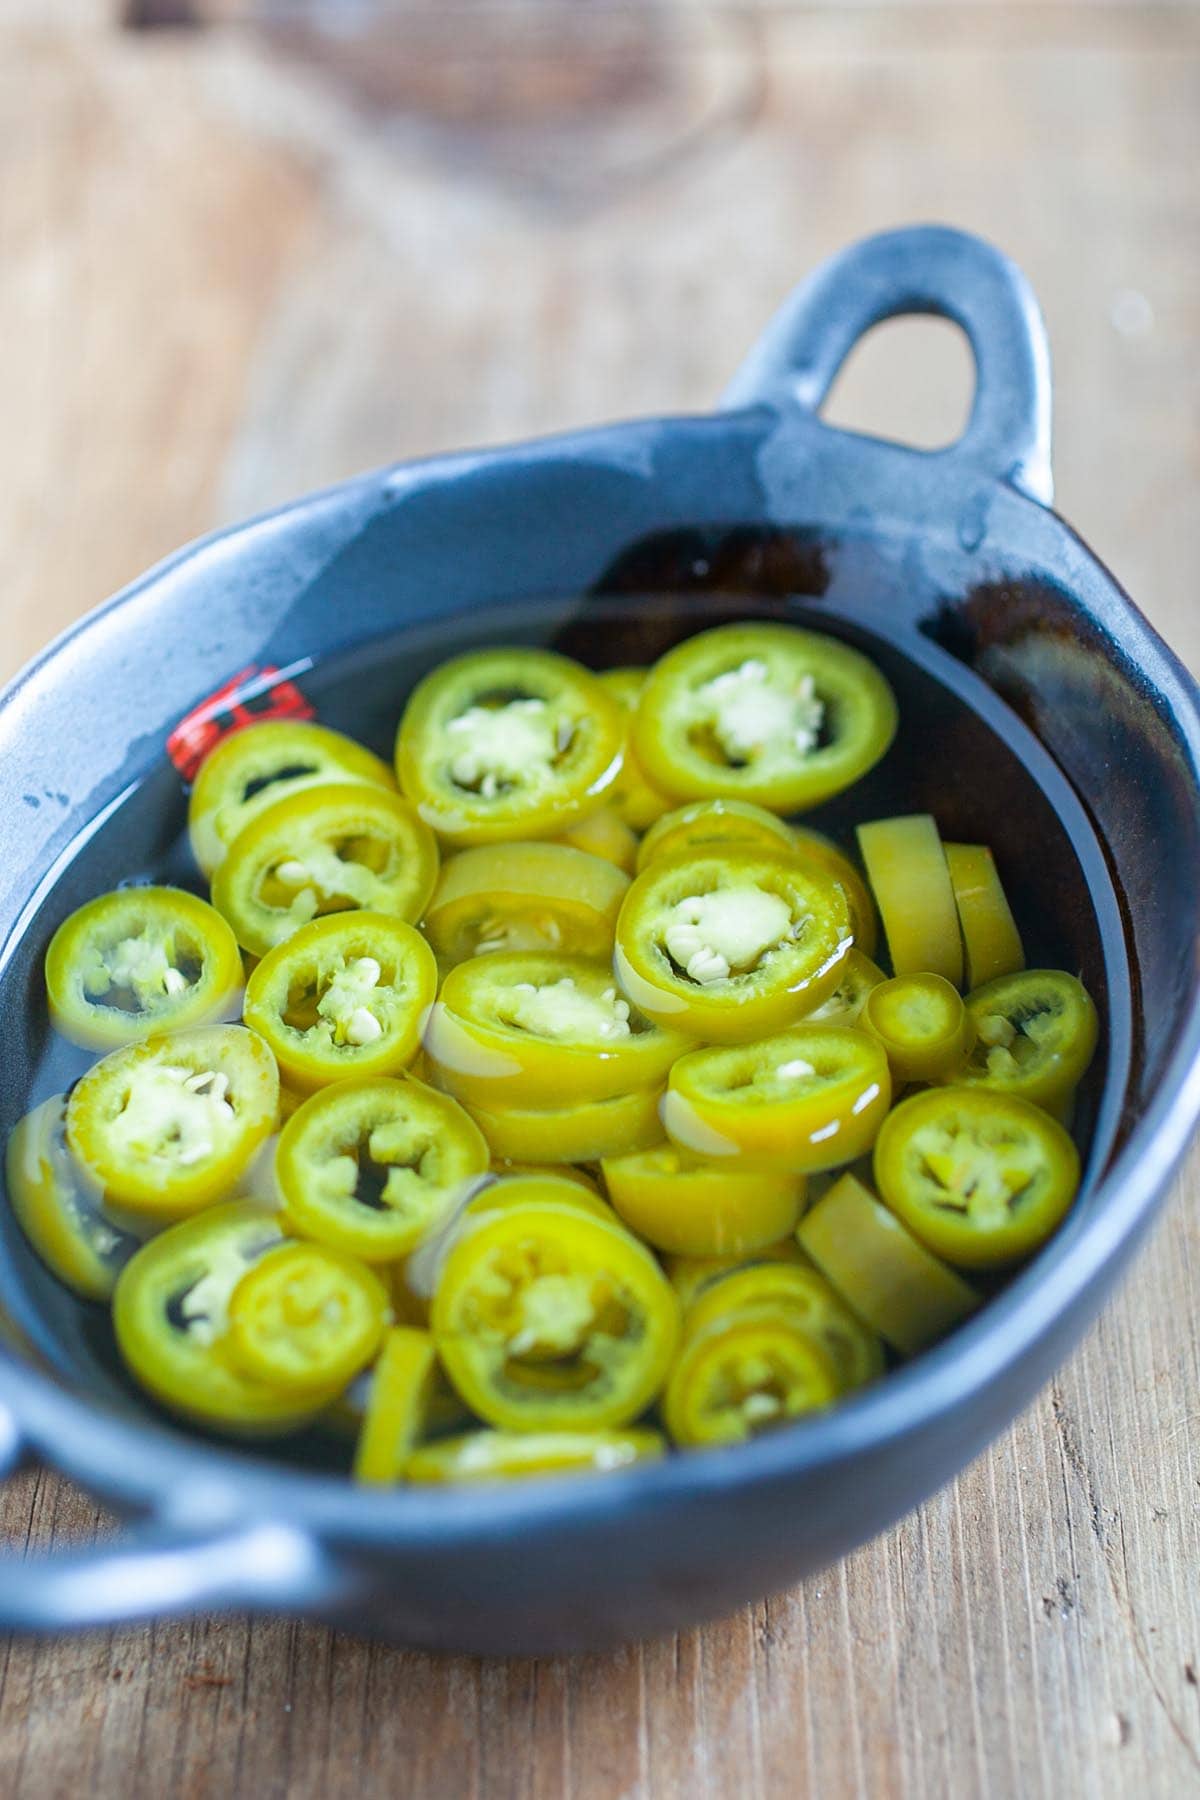 Pickled green chili is a popular condiment that accompanies many Southeast Asian street food and Asian noodle dishes. Have these for your guest for your Chinese New Years feast. | rasamalaysia.com